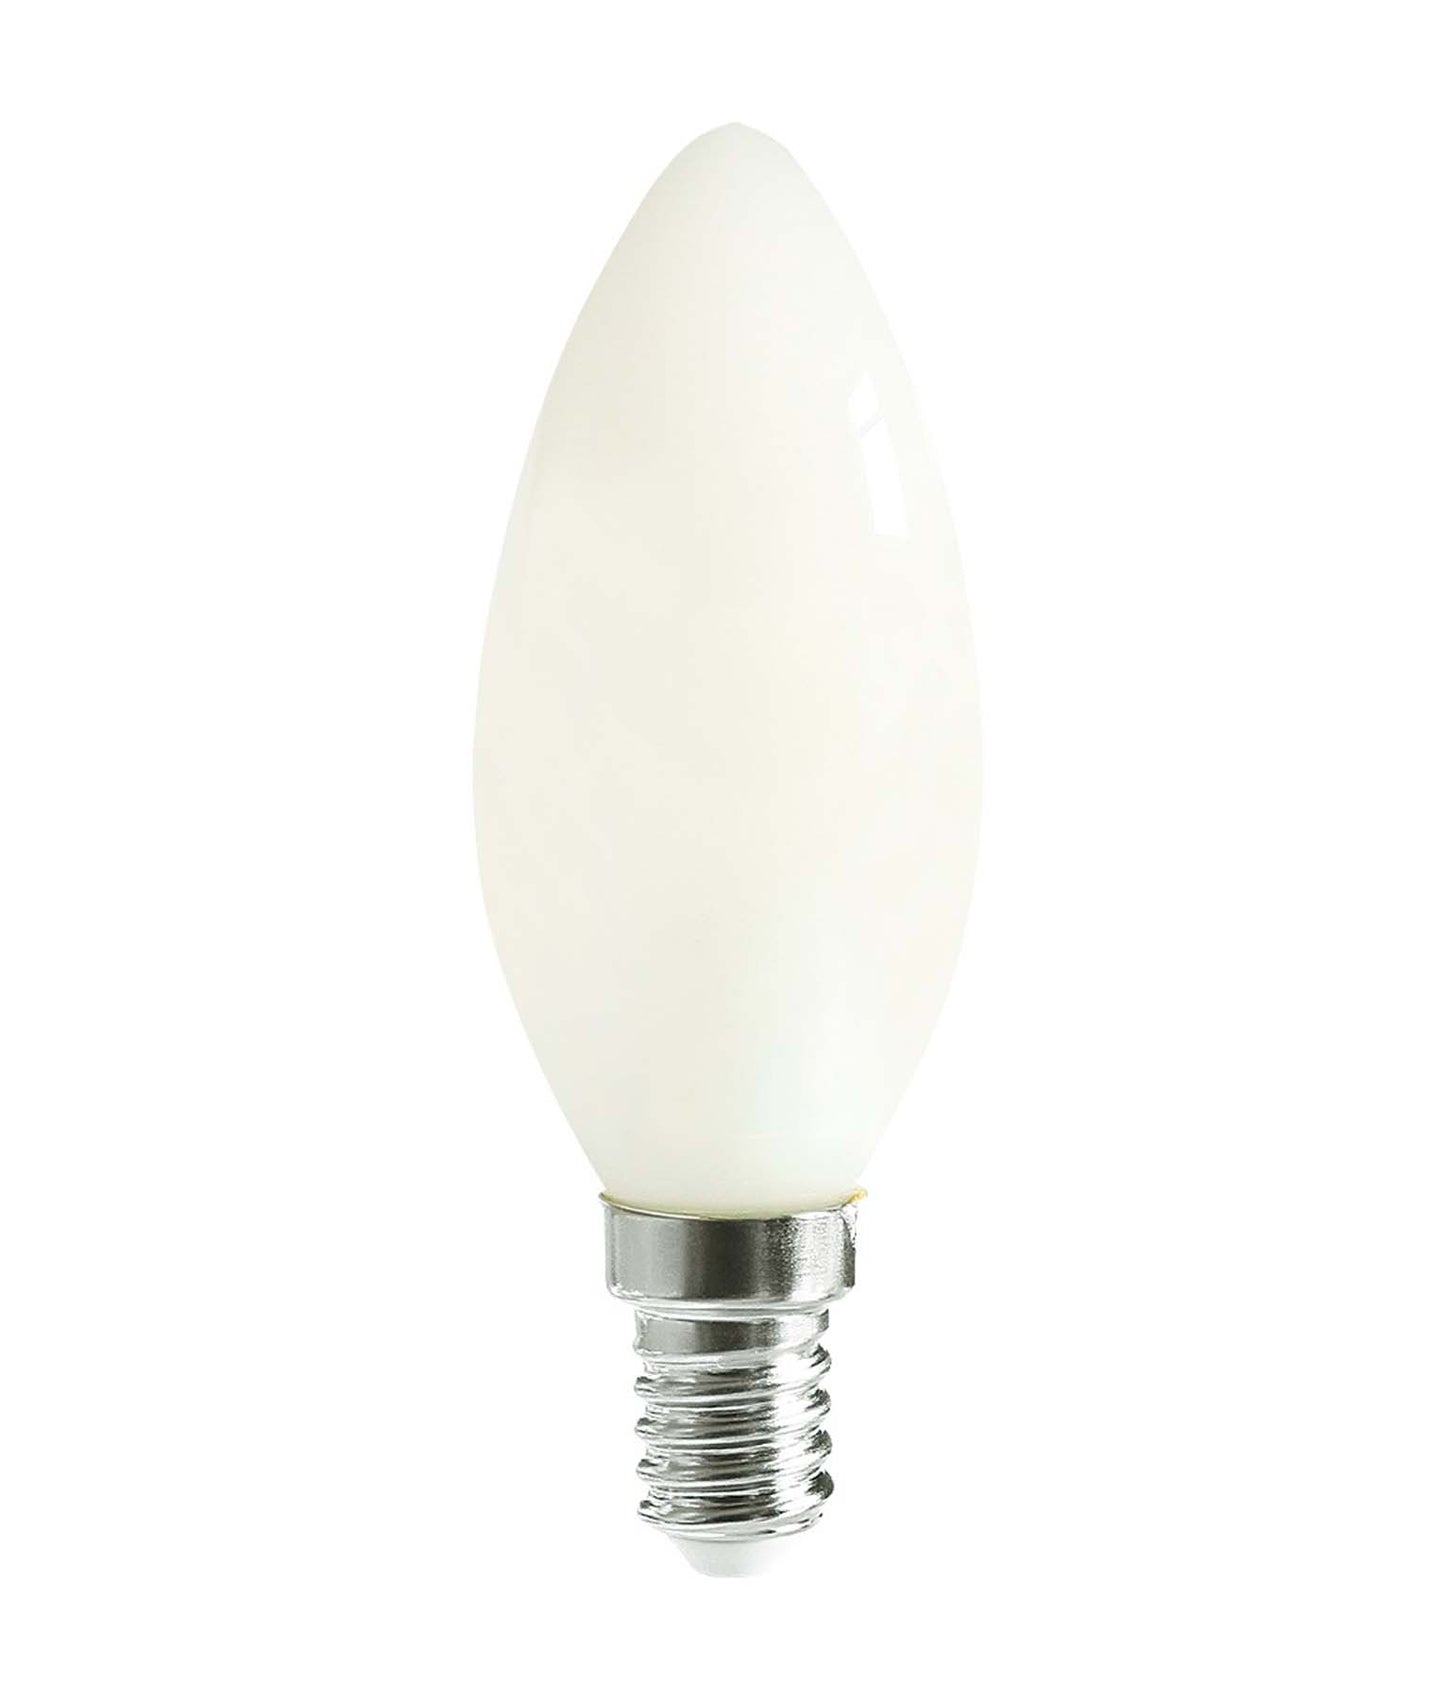 Candle LED Filament Dimmable Globes Frosted Diffuser (4W)